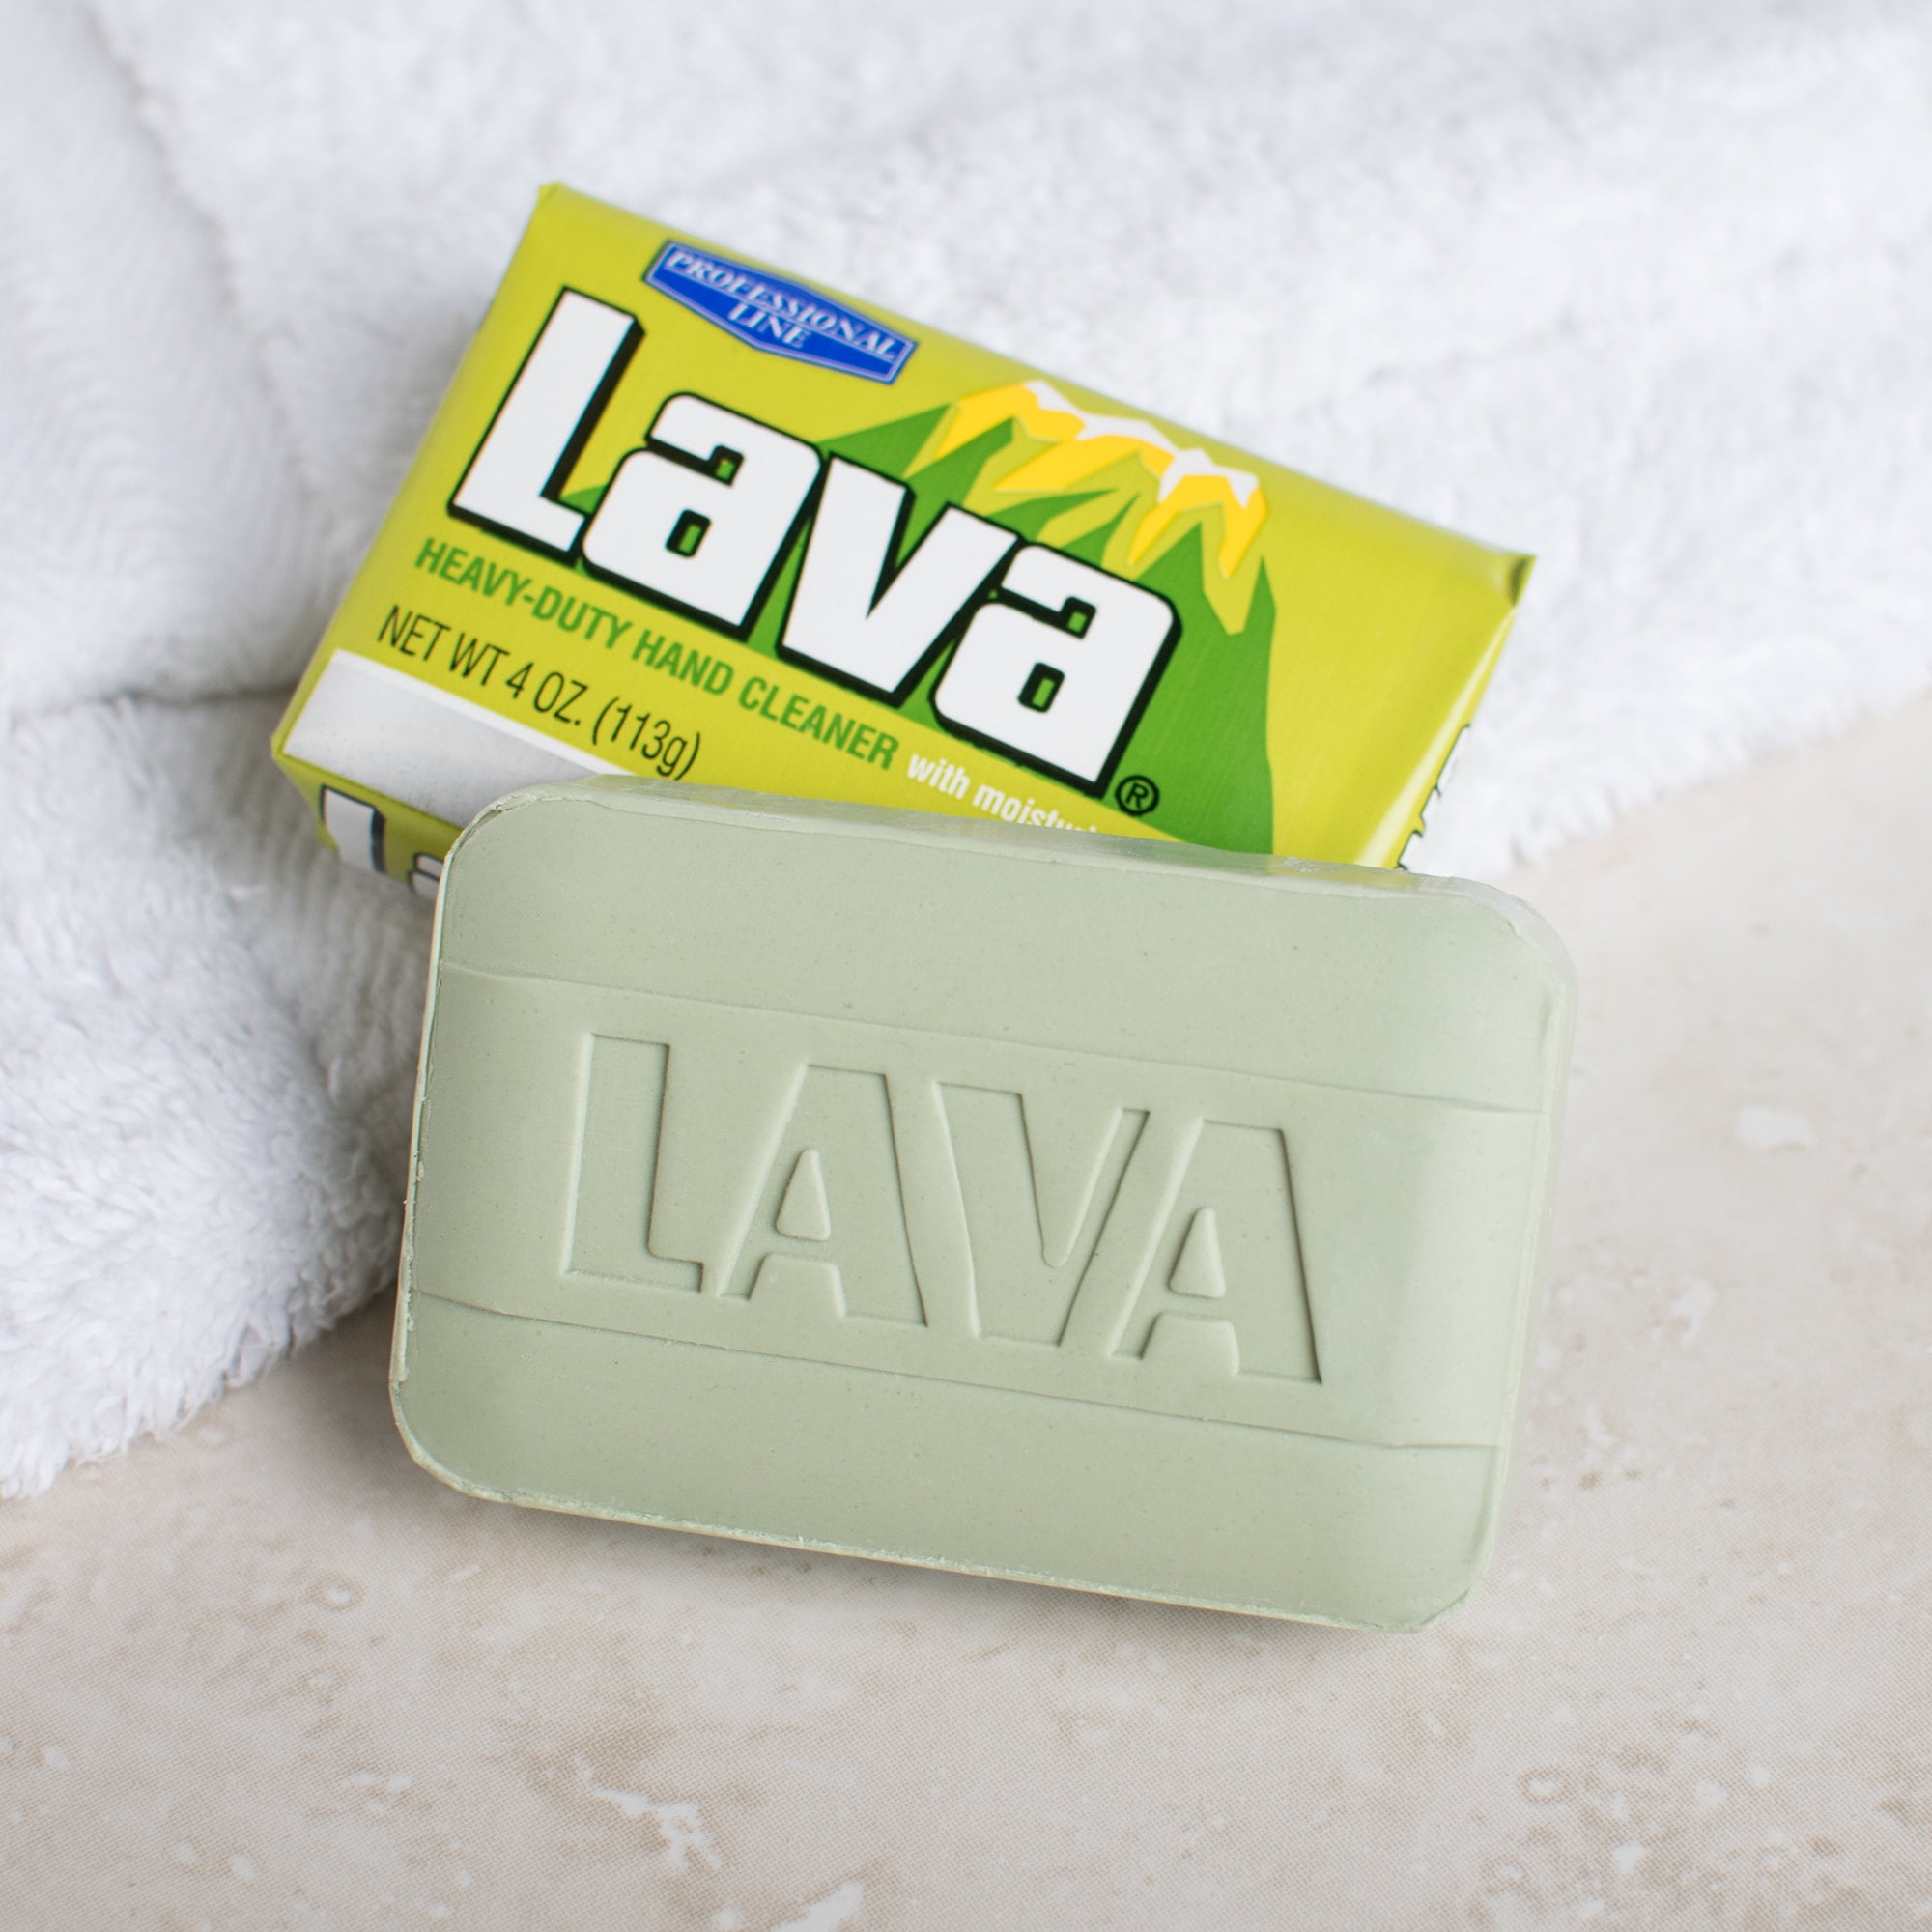 Lava 2 Pack Bar 10383 4 oz Pumice-Powered Hand Soap with Moisturizers, Size: 4 Ounce, Other